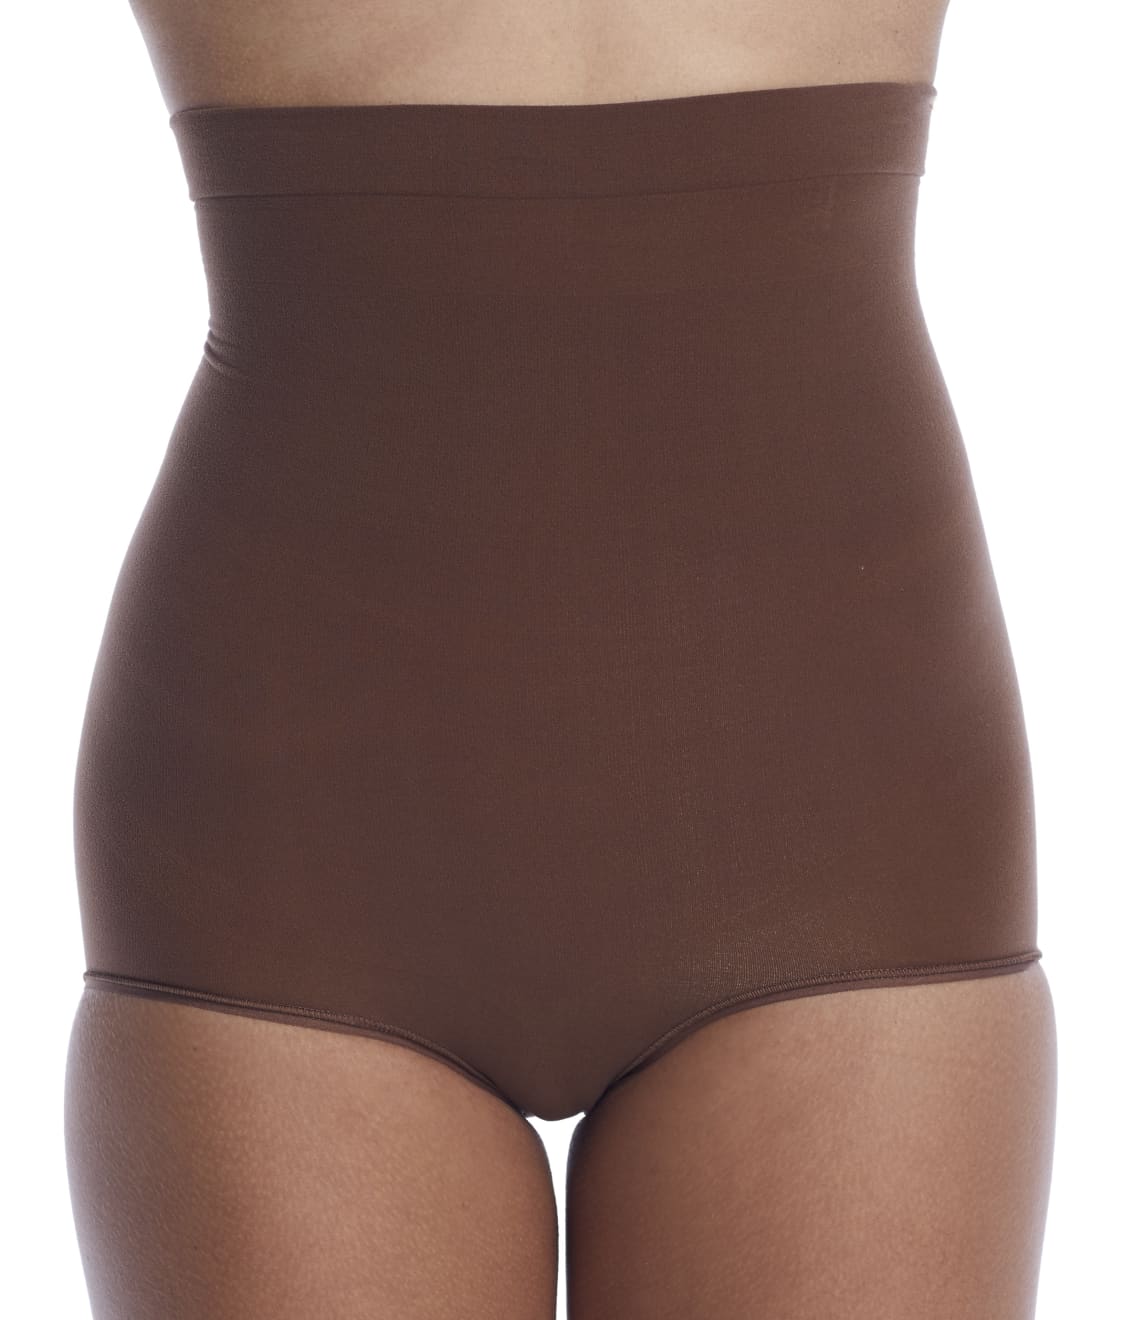 Spanx Higher Power Shaper Panties Style 2746 Soft Nude Size XL